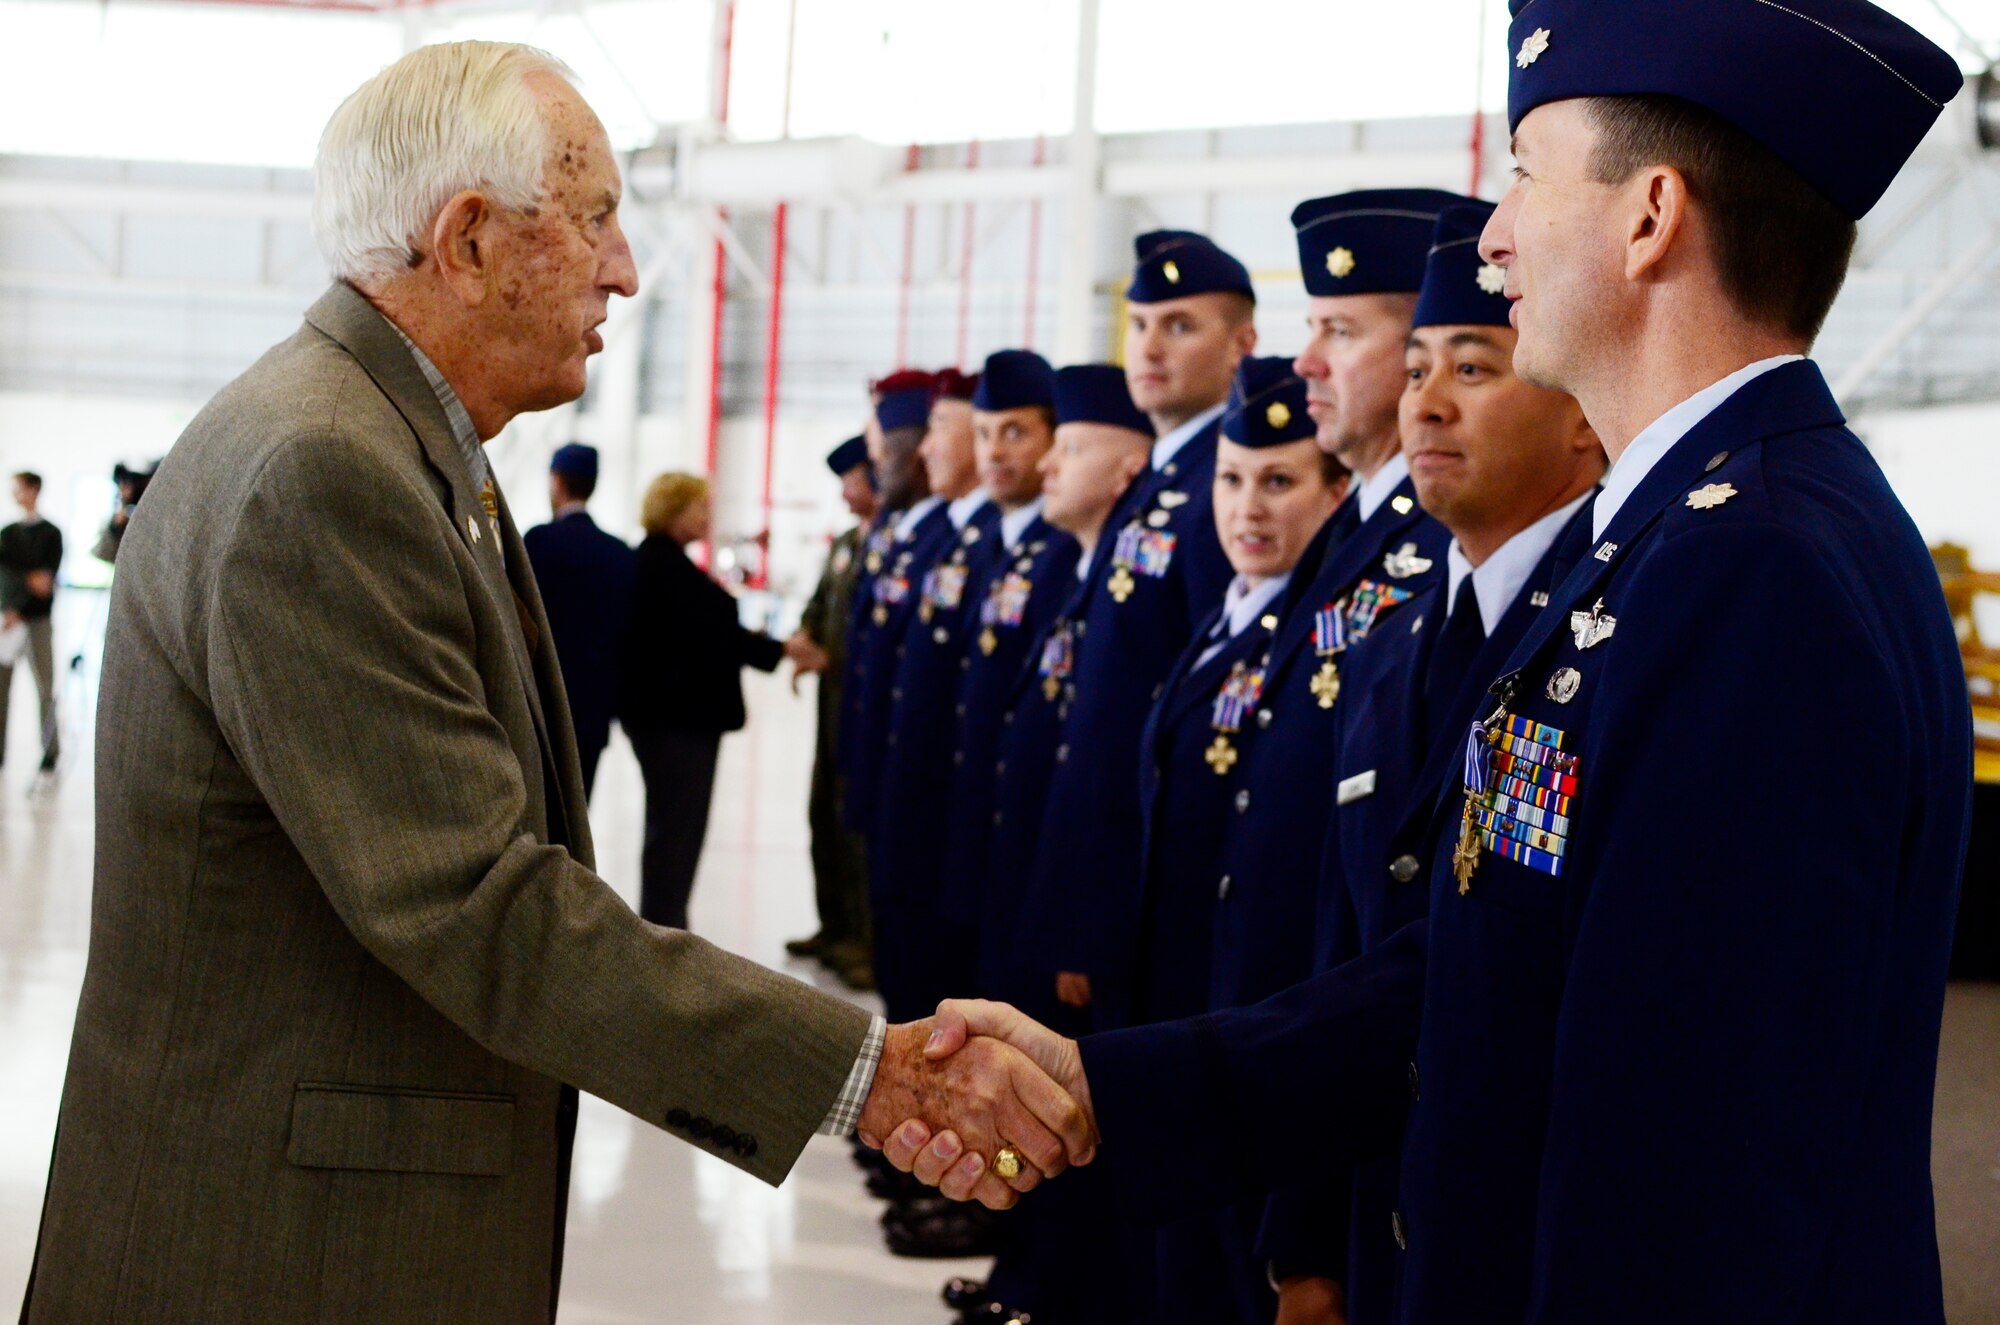 Lt. Col. Jay Craddock (retired) presents the Distinguished Flying Cross with Valor to Airmen at Moffett Federal Airfield, Calif., Nov. 5, 2011. Craddock is a former group commander at the 129th Rescue Wing. 129th Rescue Wing Airmen heroically performed combat rescue missions in Afghanistan, often under hostile fire, in 2009 and 2010. Because of these actions they received the Distinguished Flying Cross, a medal awarded to servicemembers who distinguish themselves in support of operations by heroism or extraordinary achievement while participating in an aerial flight. (Air National Guard photo by Airman 1st Class John Pharr)